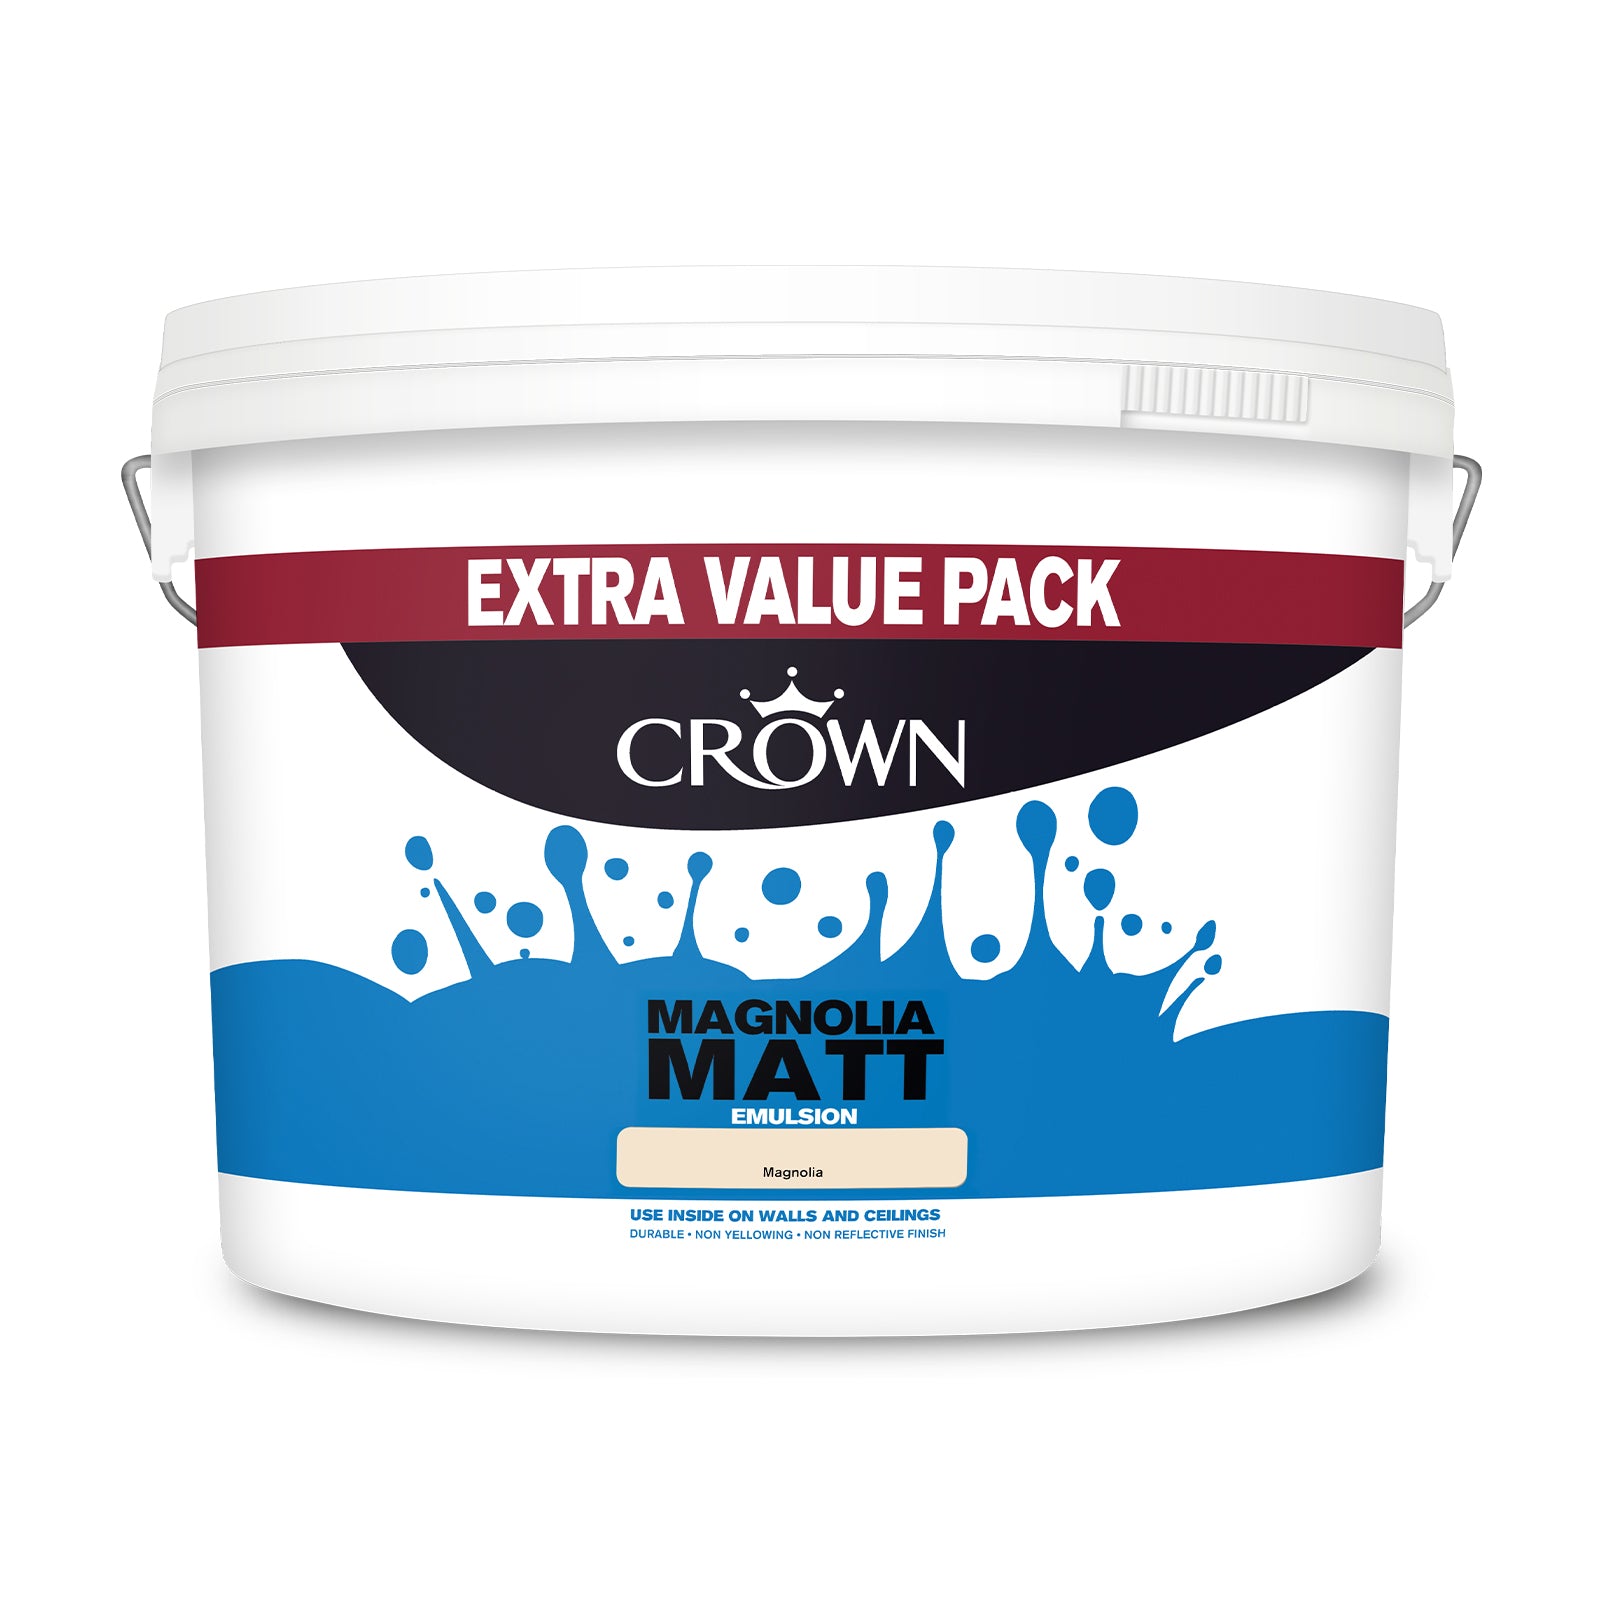 Crown Clean Extreme Paint: Protecting Your Walls